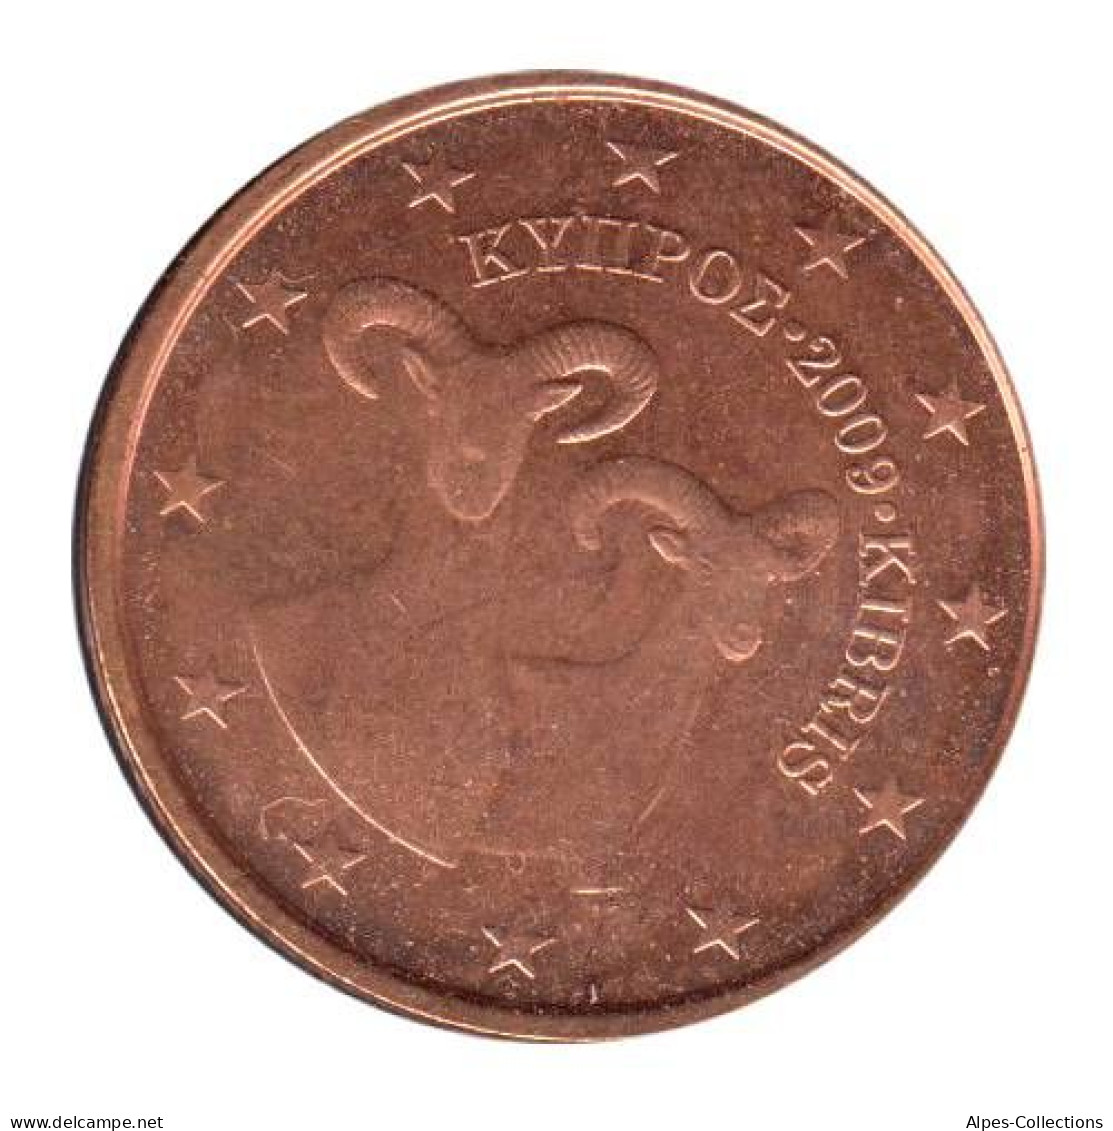 CH00209.1 - CHYPRE - 2 Cents D'euro - 2009 - Cyprus